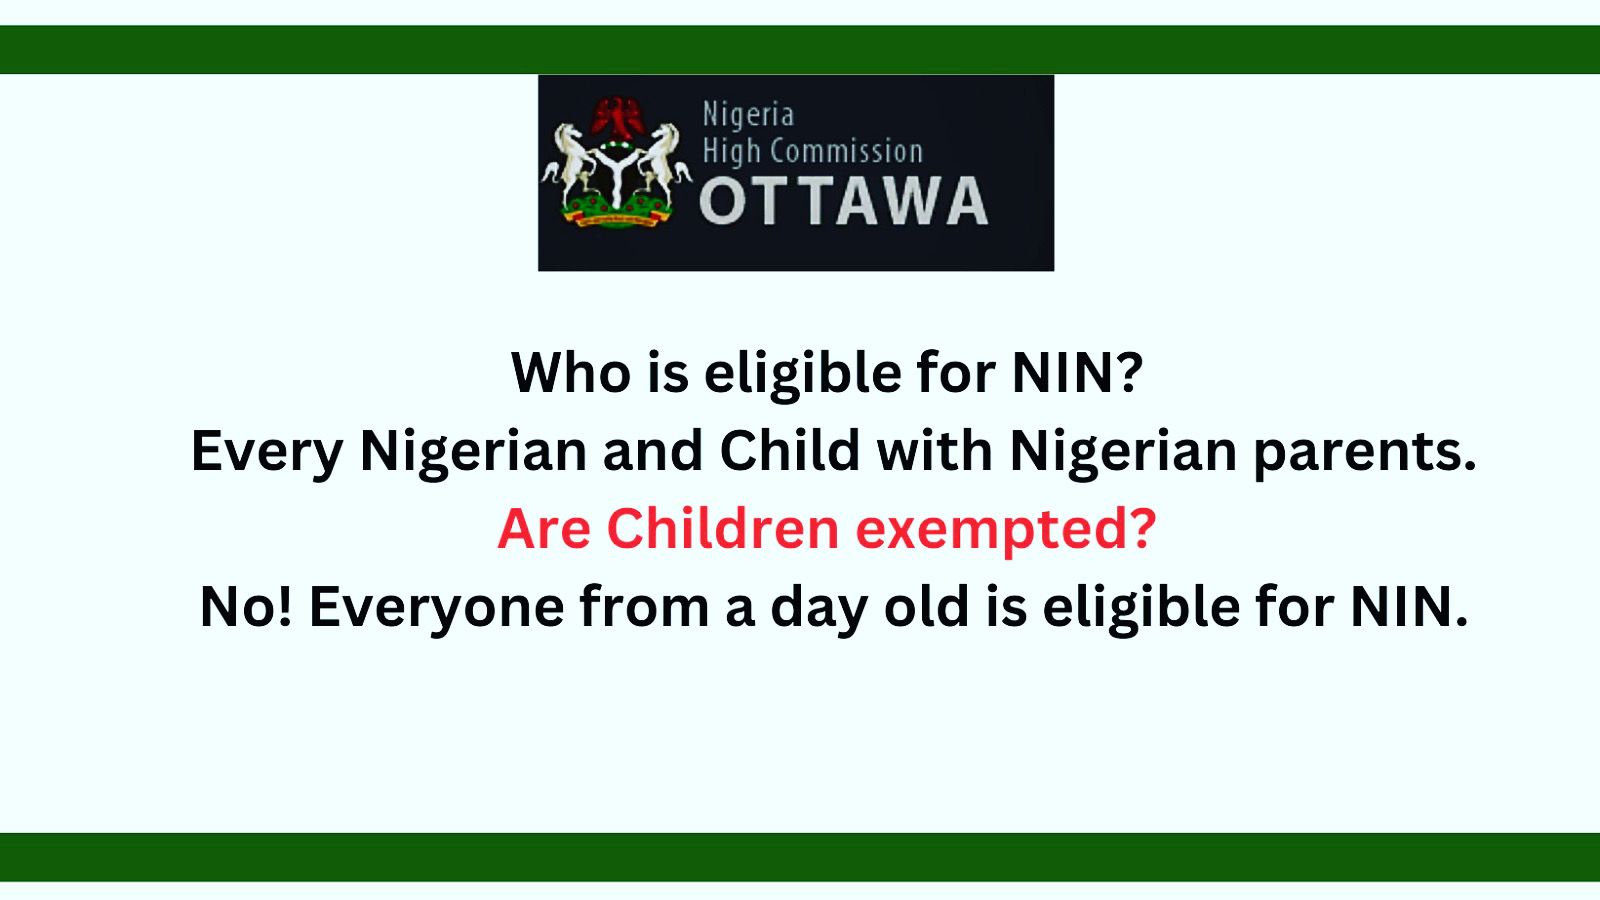 WHO IS ELIGIBLE FOR NIN?